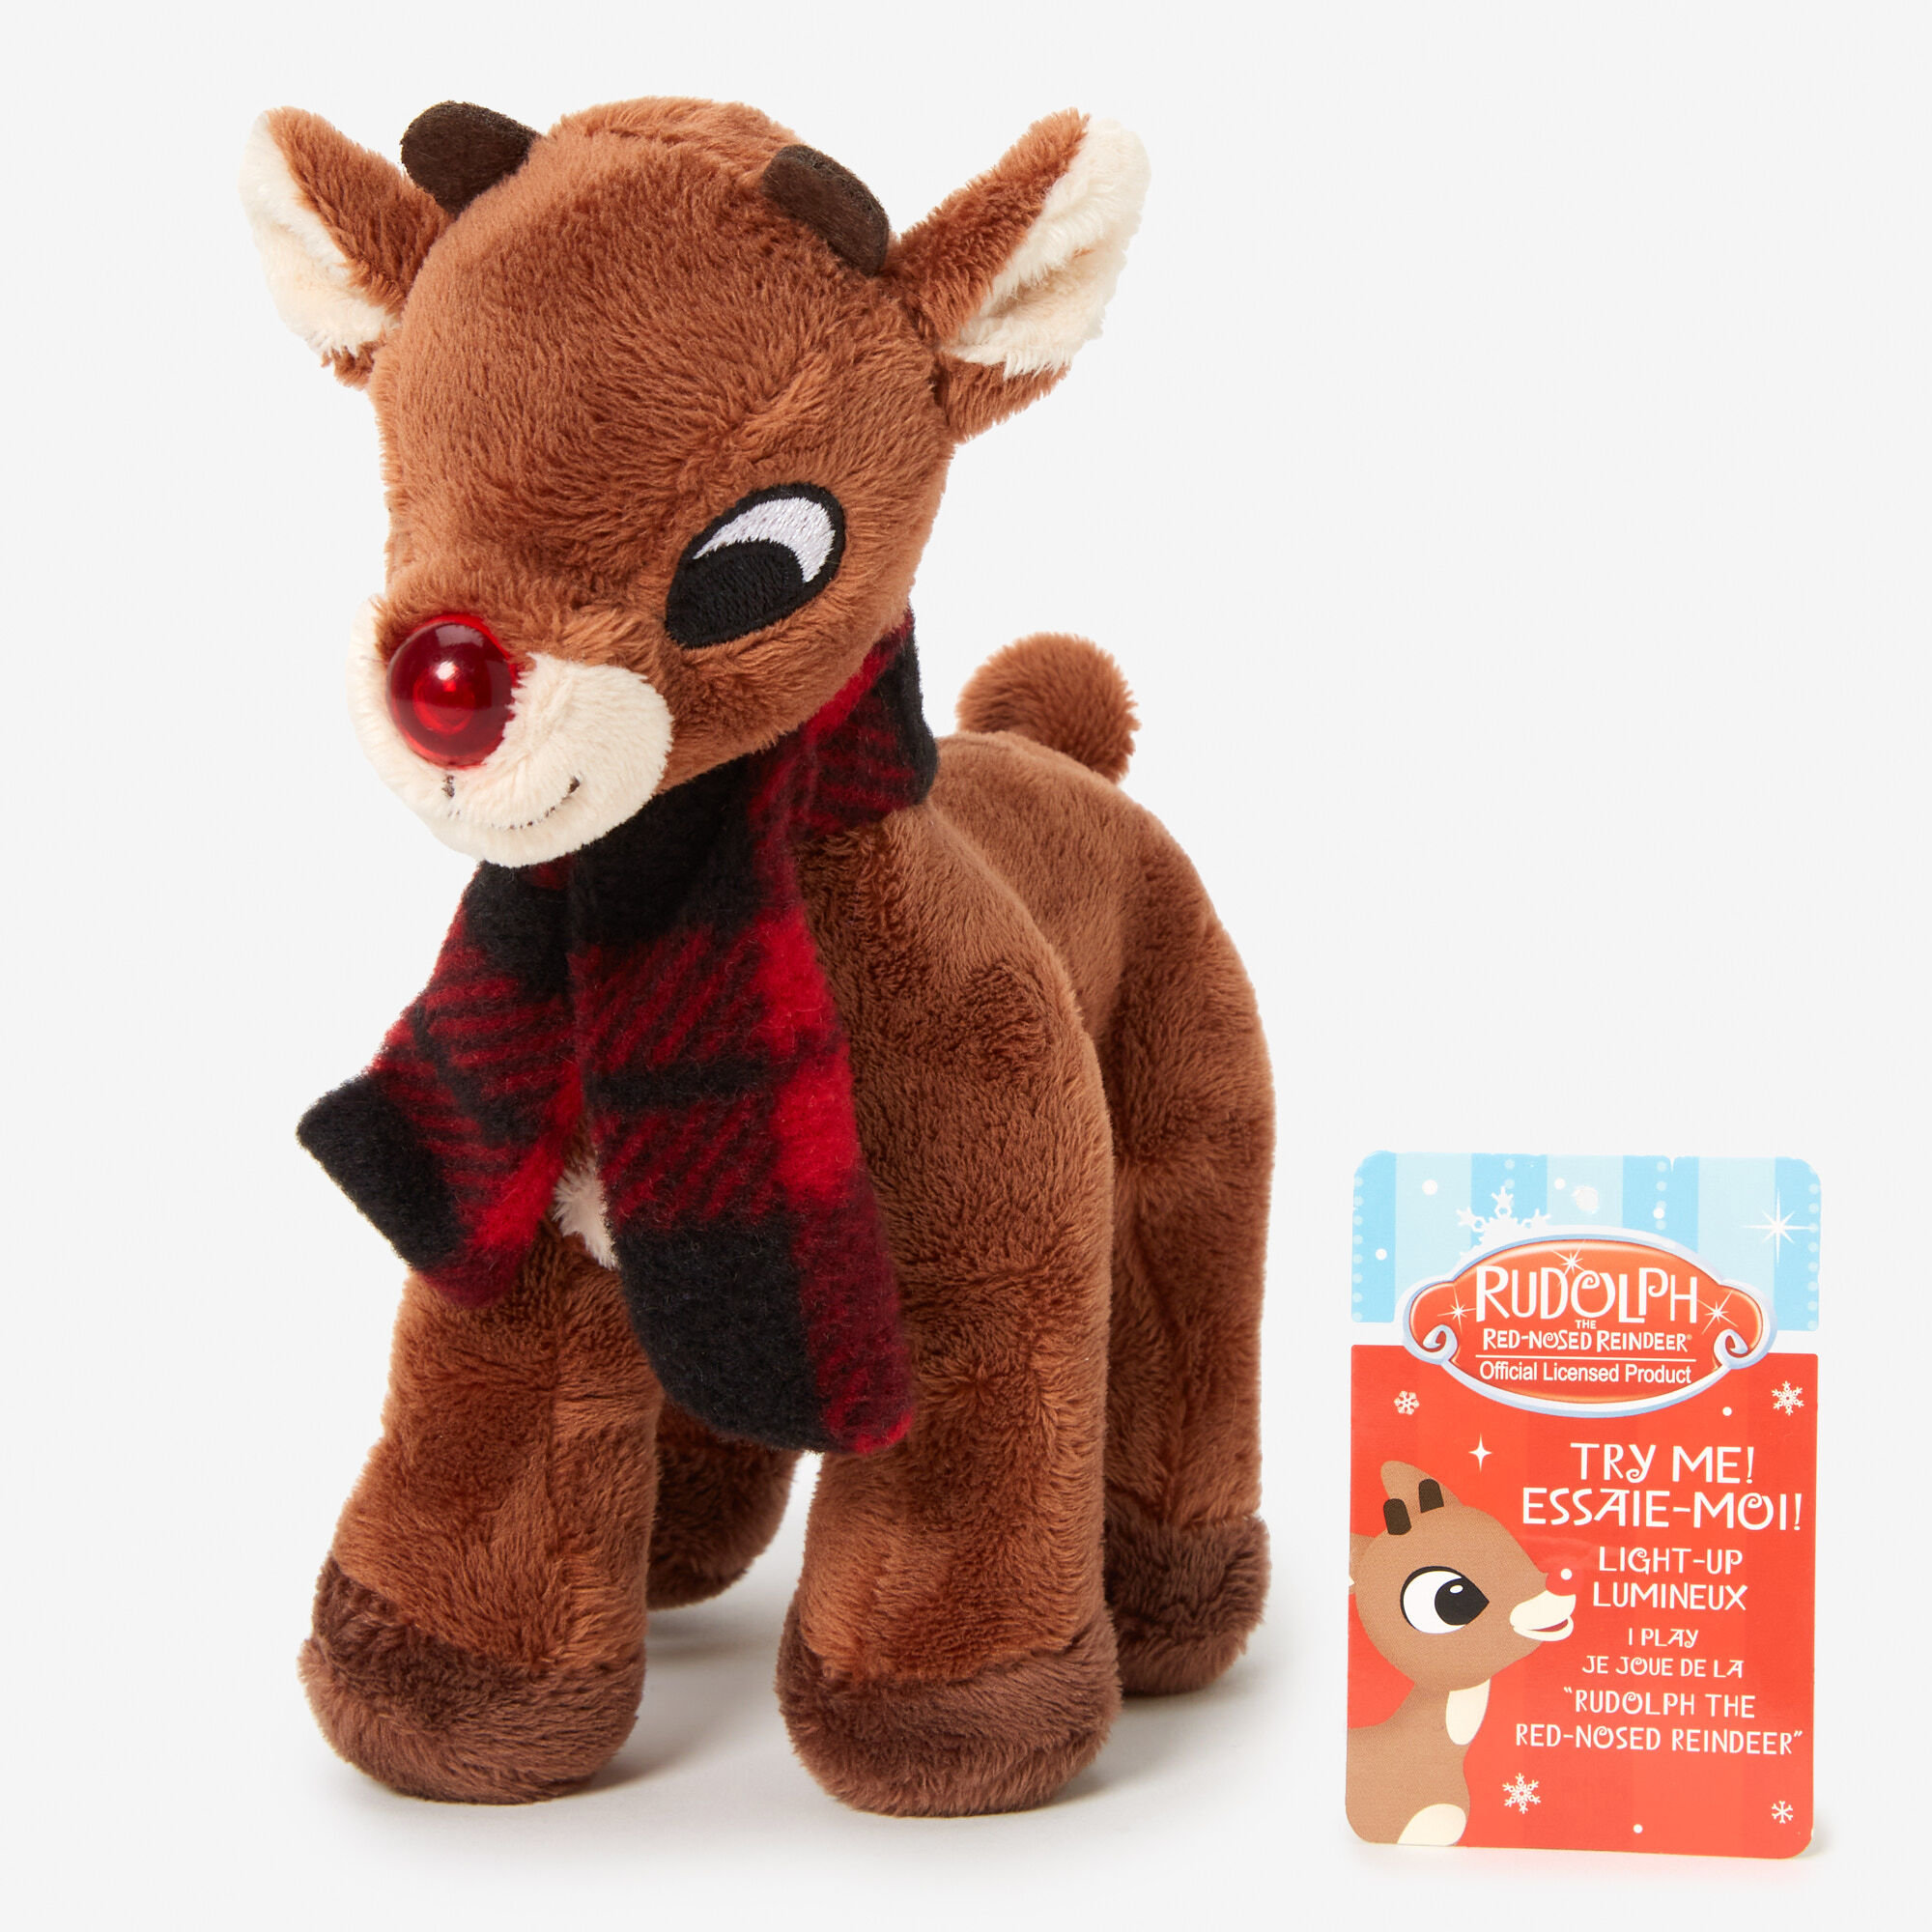 Rudolph the Red-Nosed Reindeer ~ Rudolph 